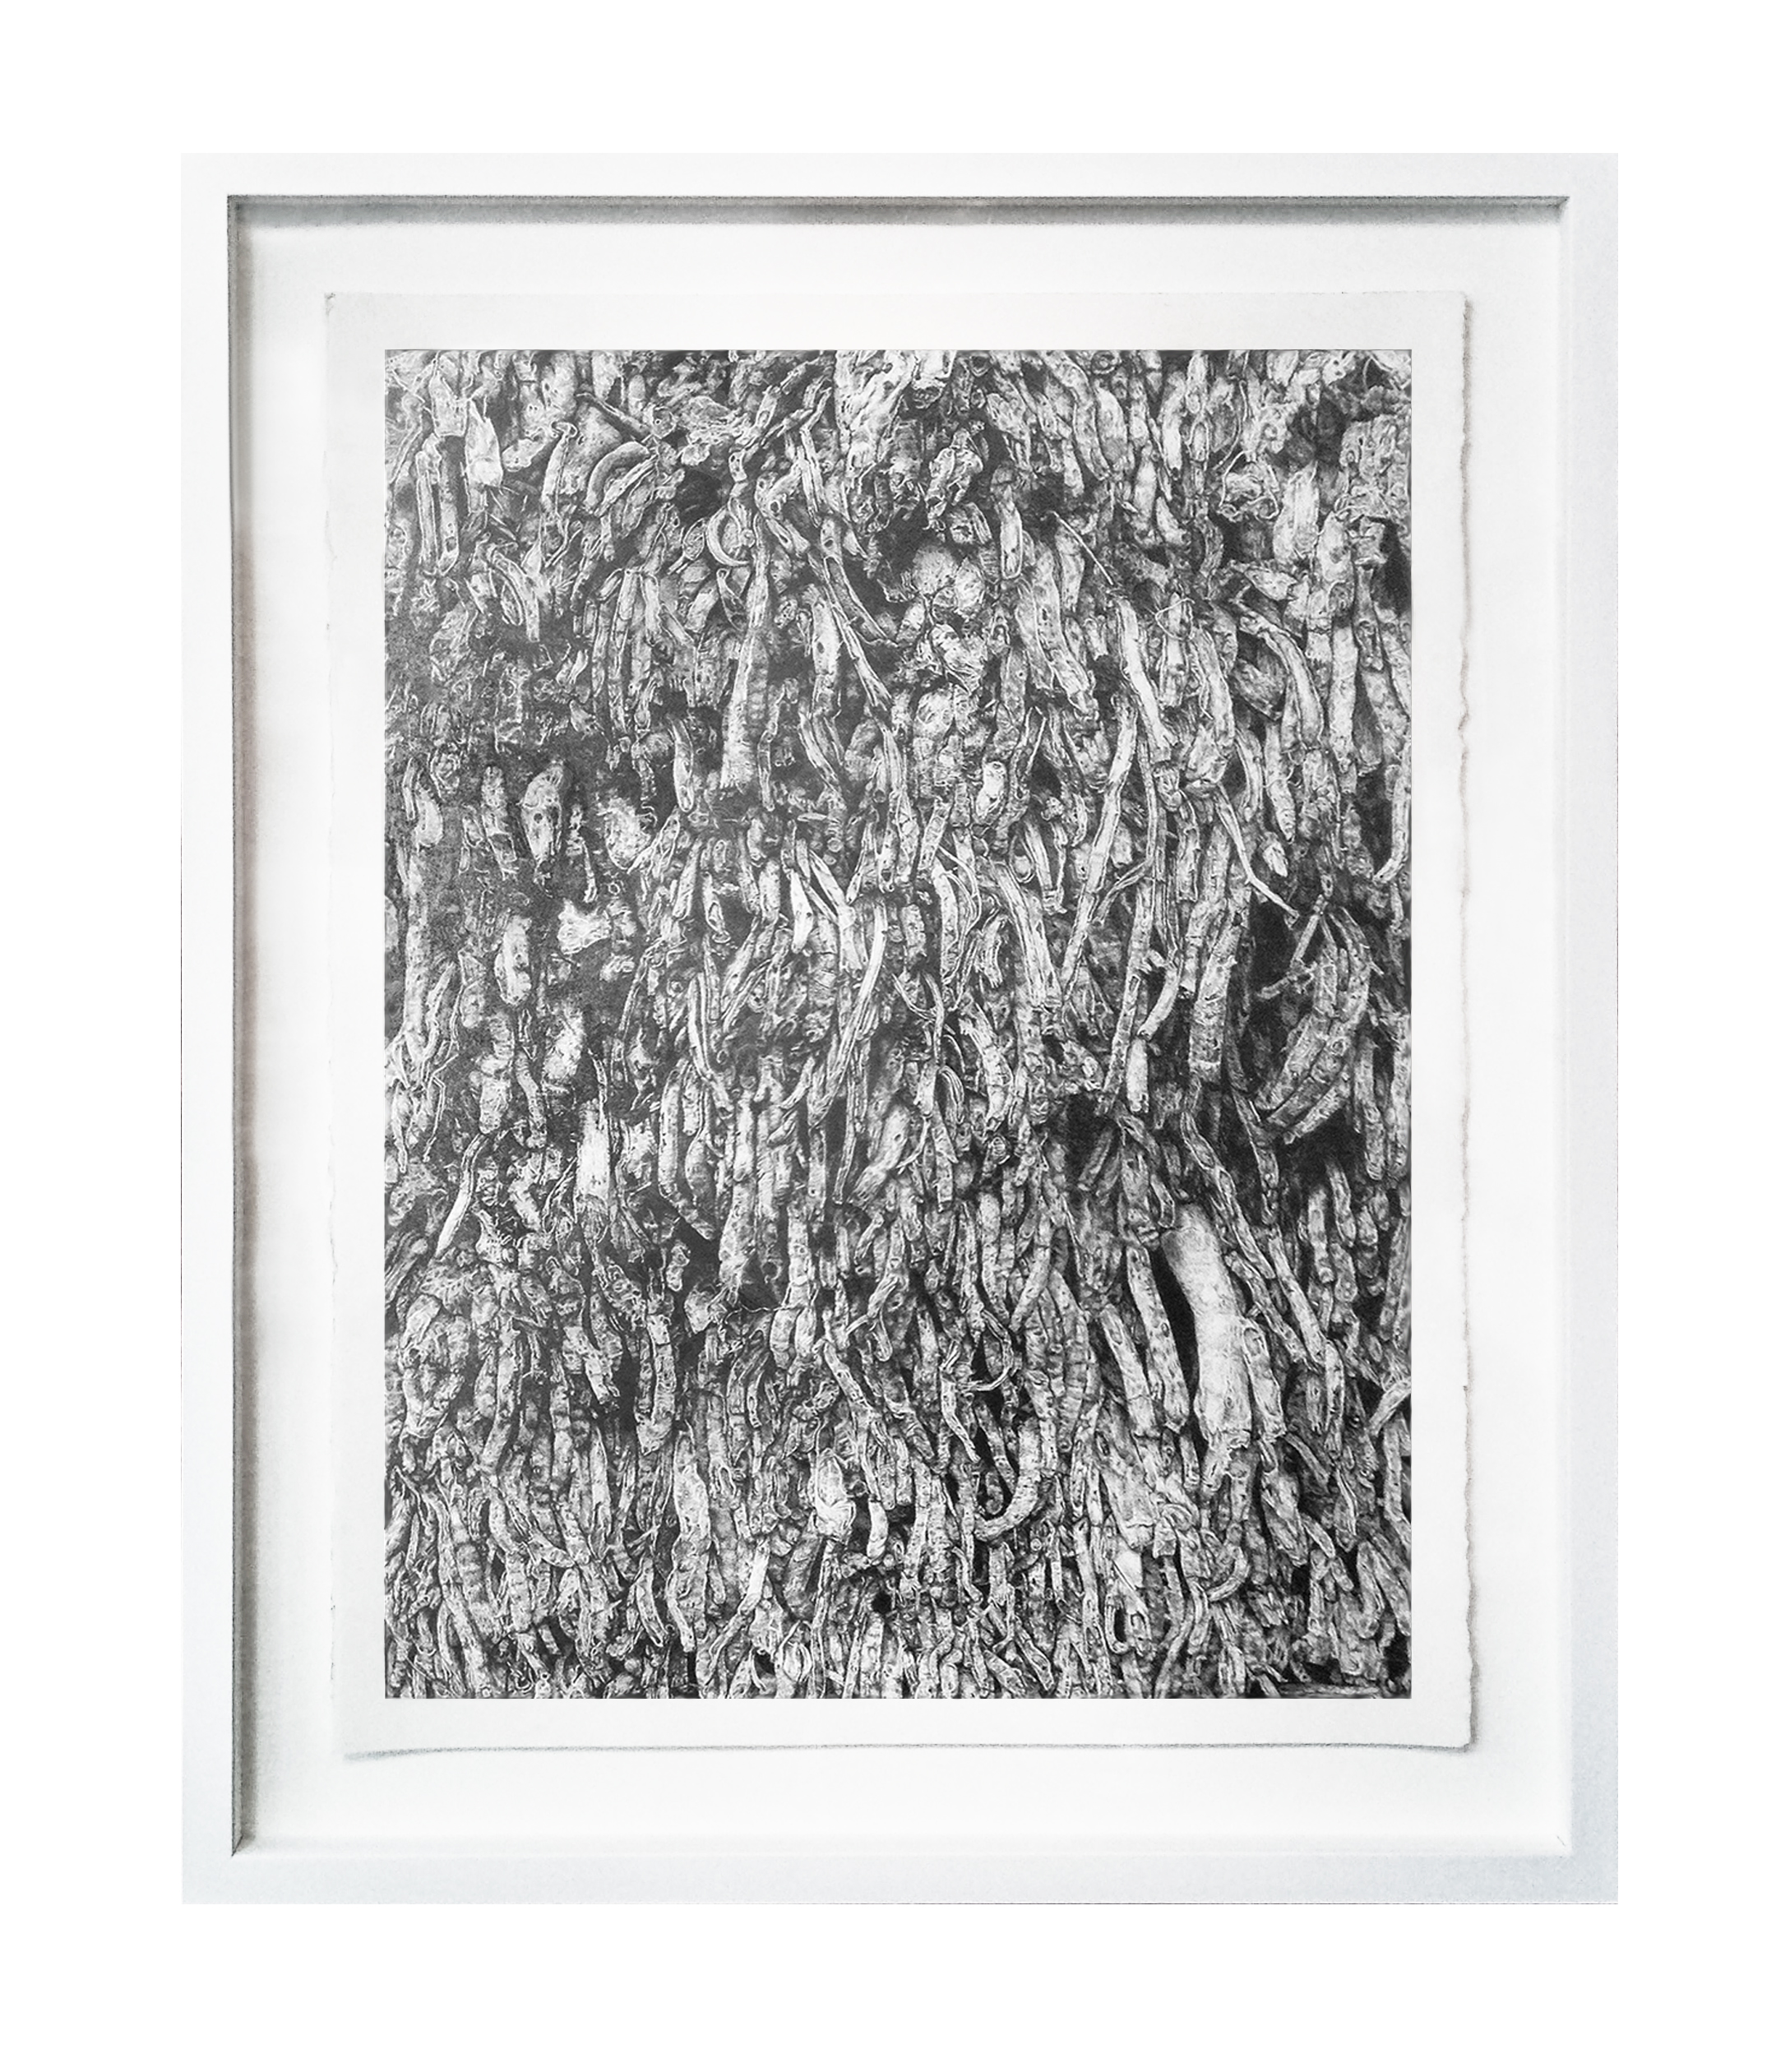  Carol Hudson  Michelle's Garden , 2016. Graphite on Paper. 102 x 82.5 cm framed. This work was Highly Commended in Waterhouse Natural History Art Award. 